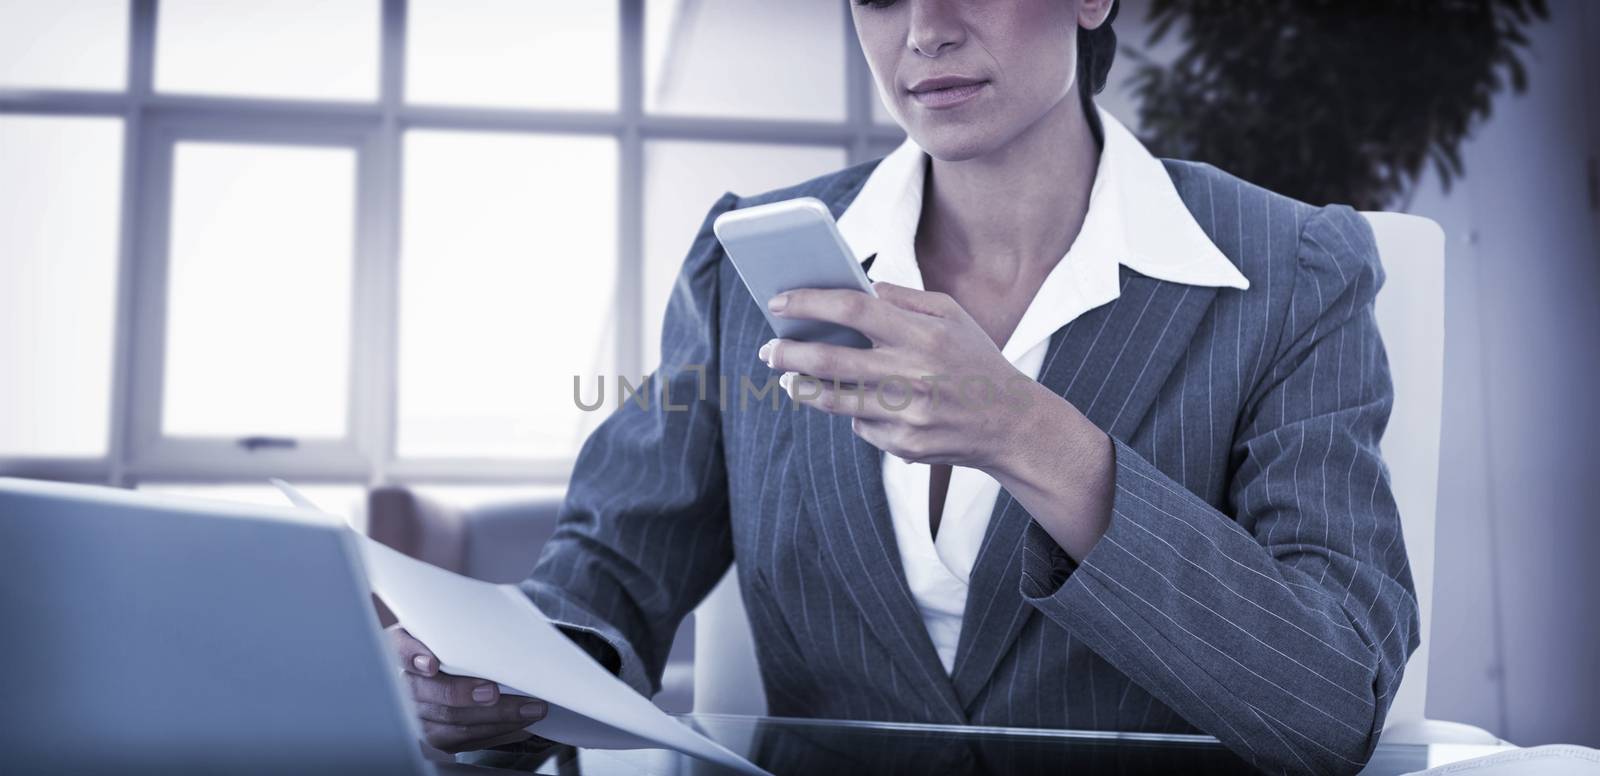 Businesswoman using her smartphone in an office